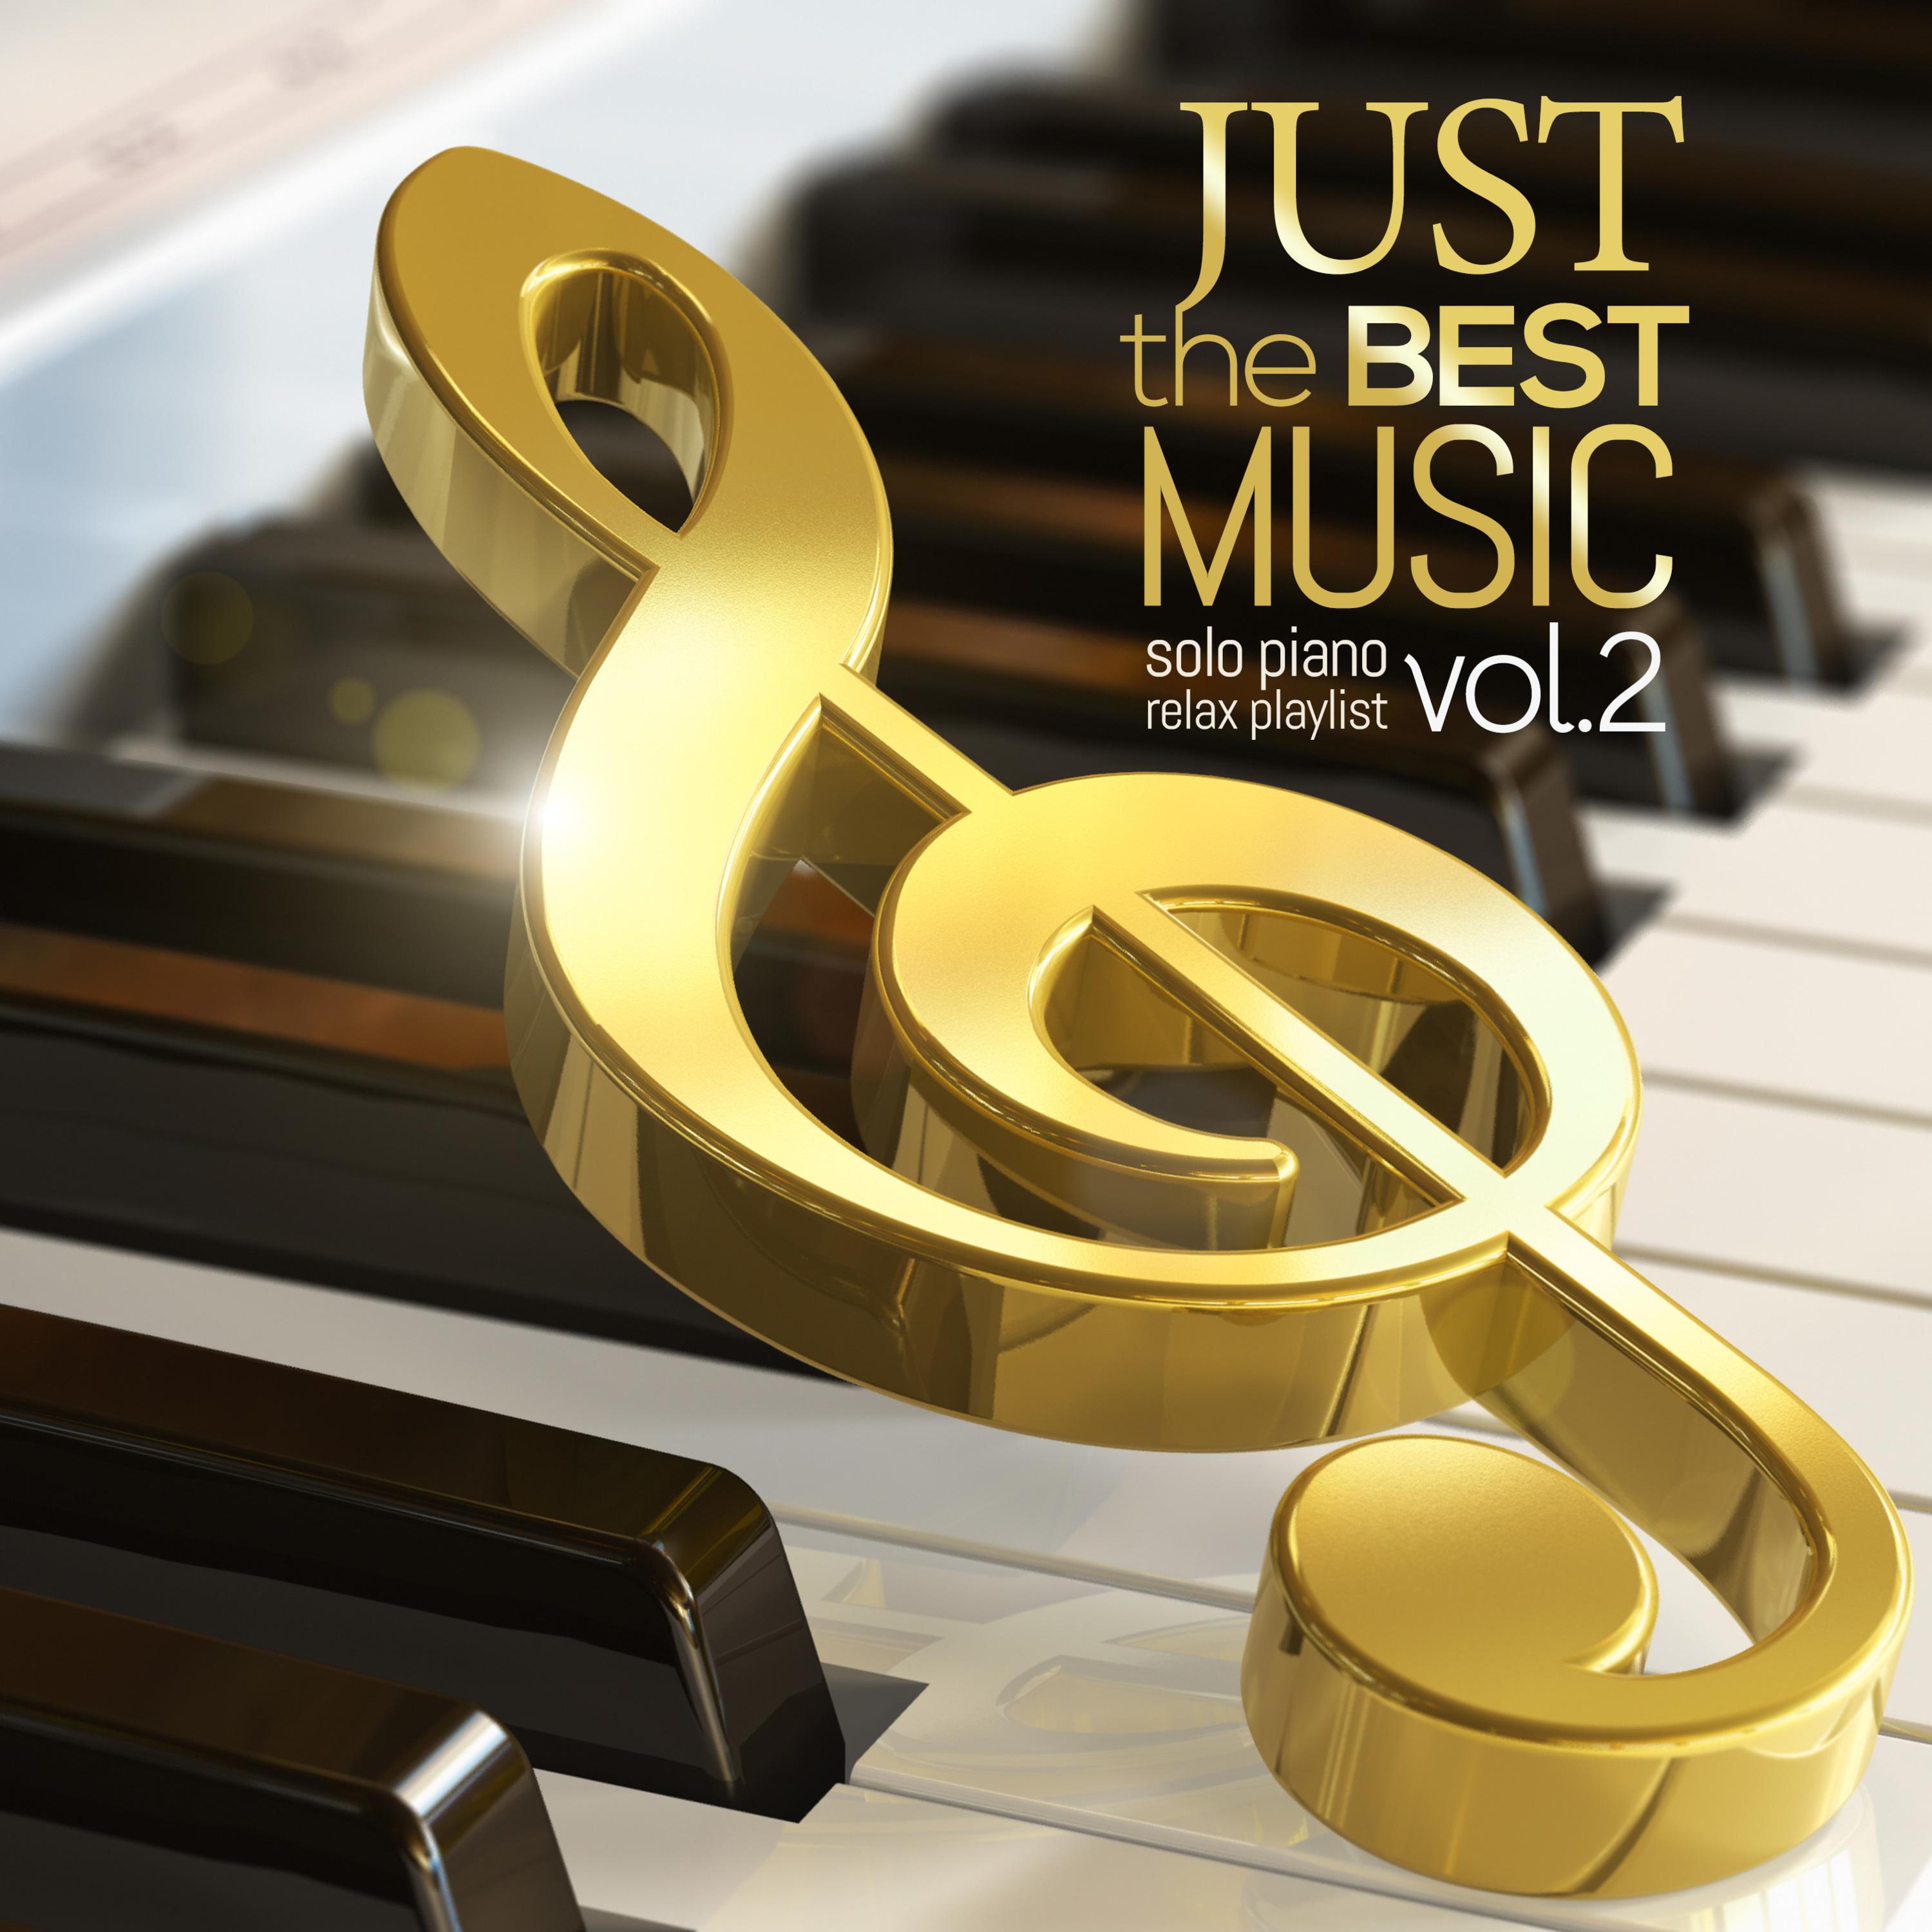 Just the Best Music Vol.2 Relax Solo Piano